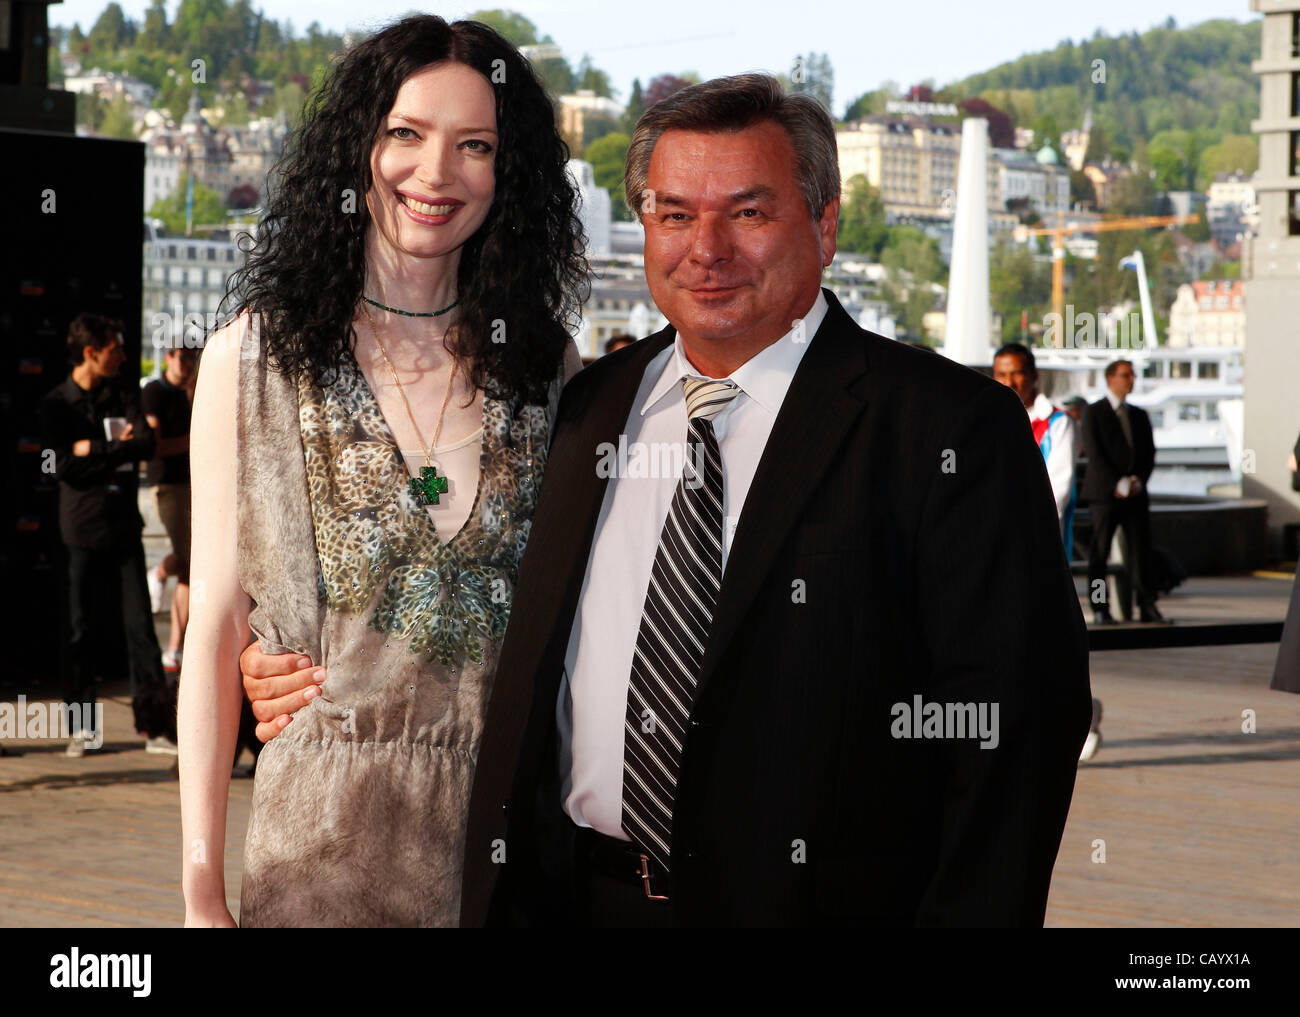 Sport Reporter Waldemar Hartmann with wife Petra at the Rose D´Or Global  Entertainment Television Festival Award Night in Luzern, Switzerland on  Thursday, 10.05.2012 / 100512 / 2012 / Mandoga Media Stock Photo - Alamy